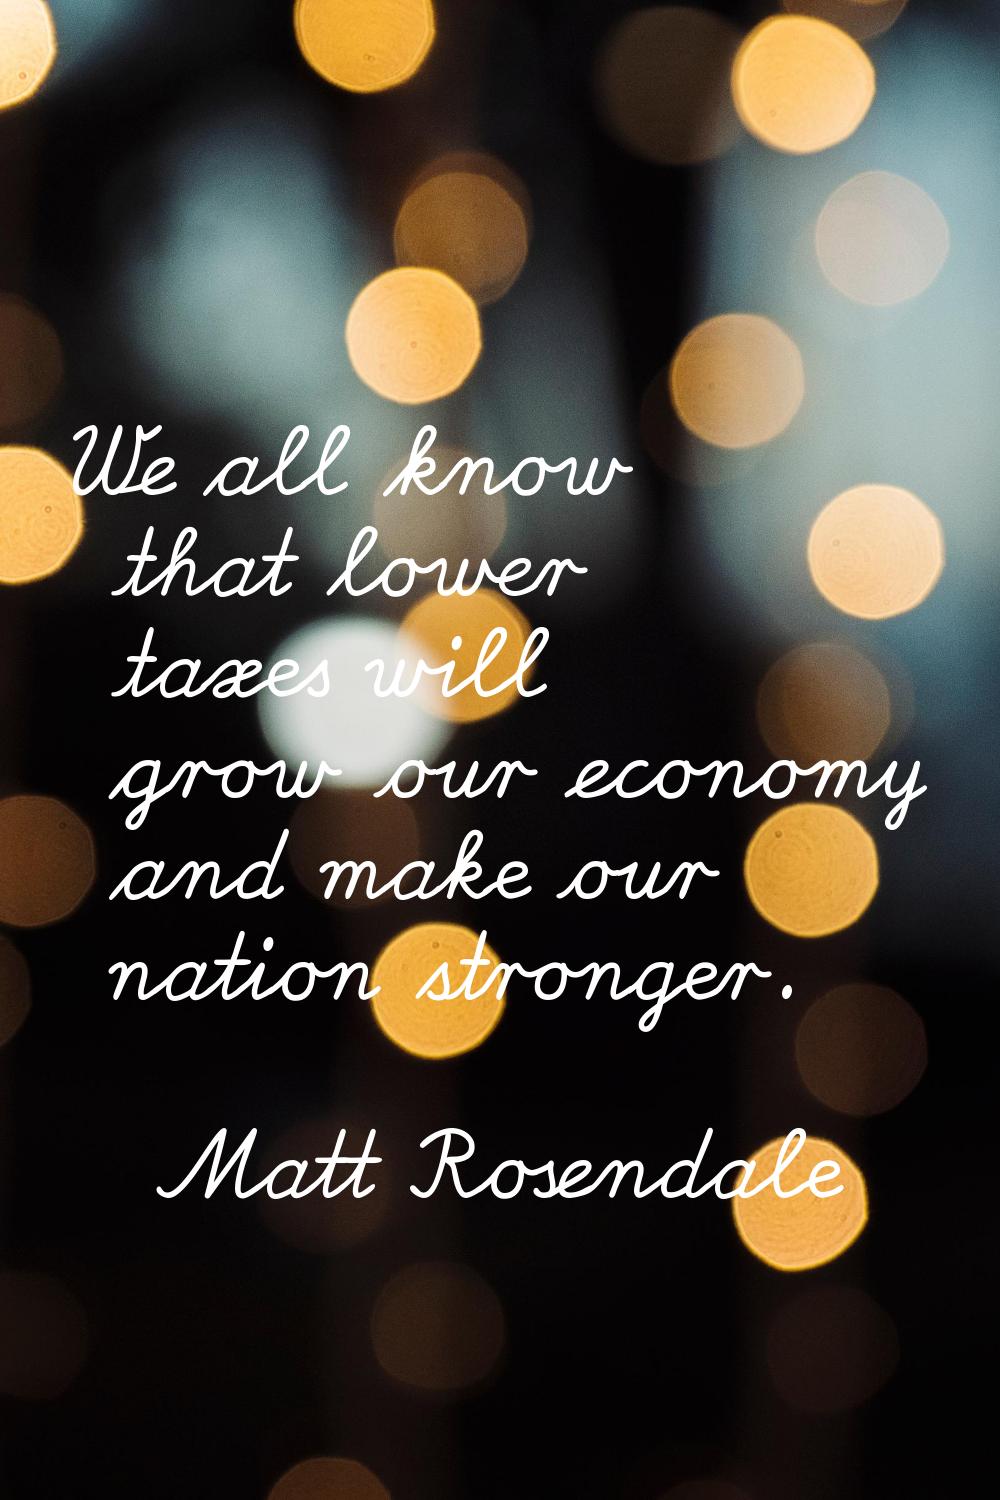 We all know that lower taxes will grow our economy and make our nation stronger.